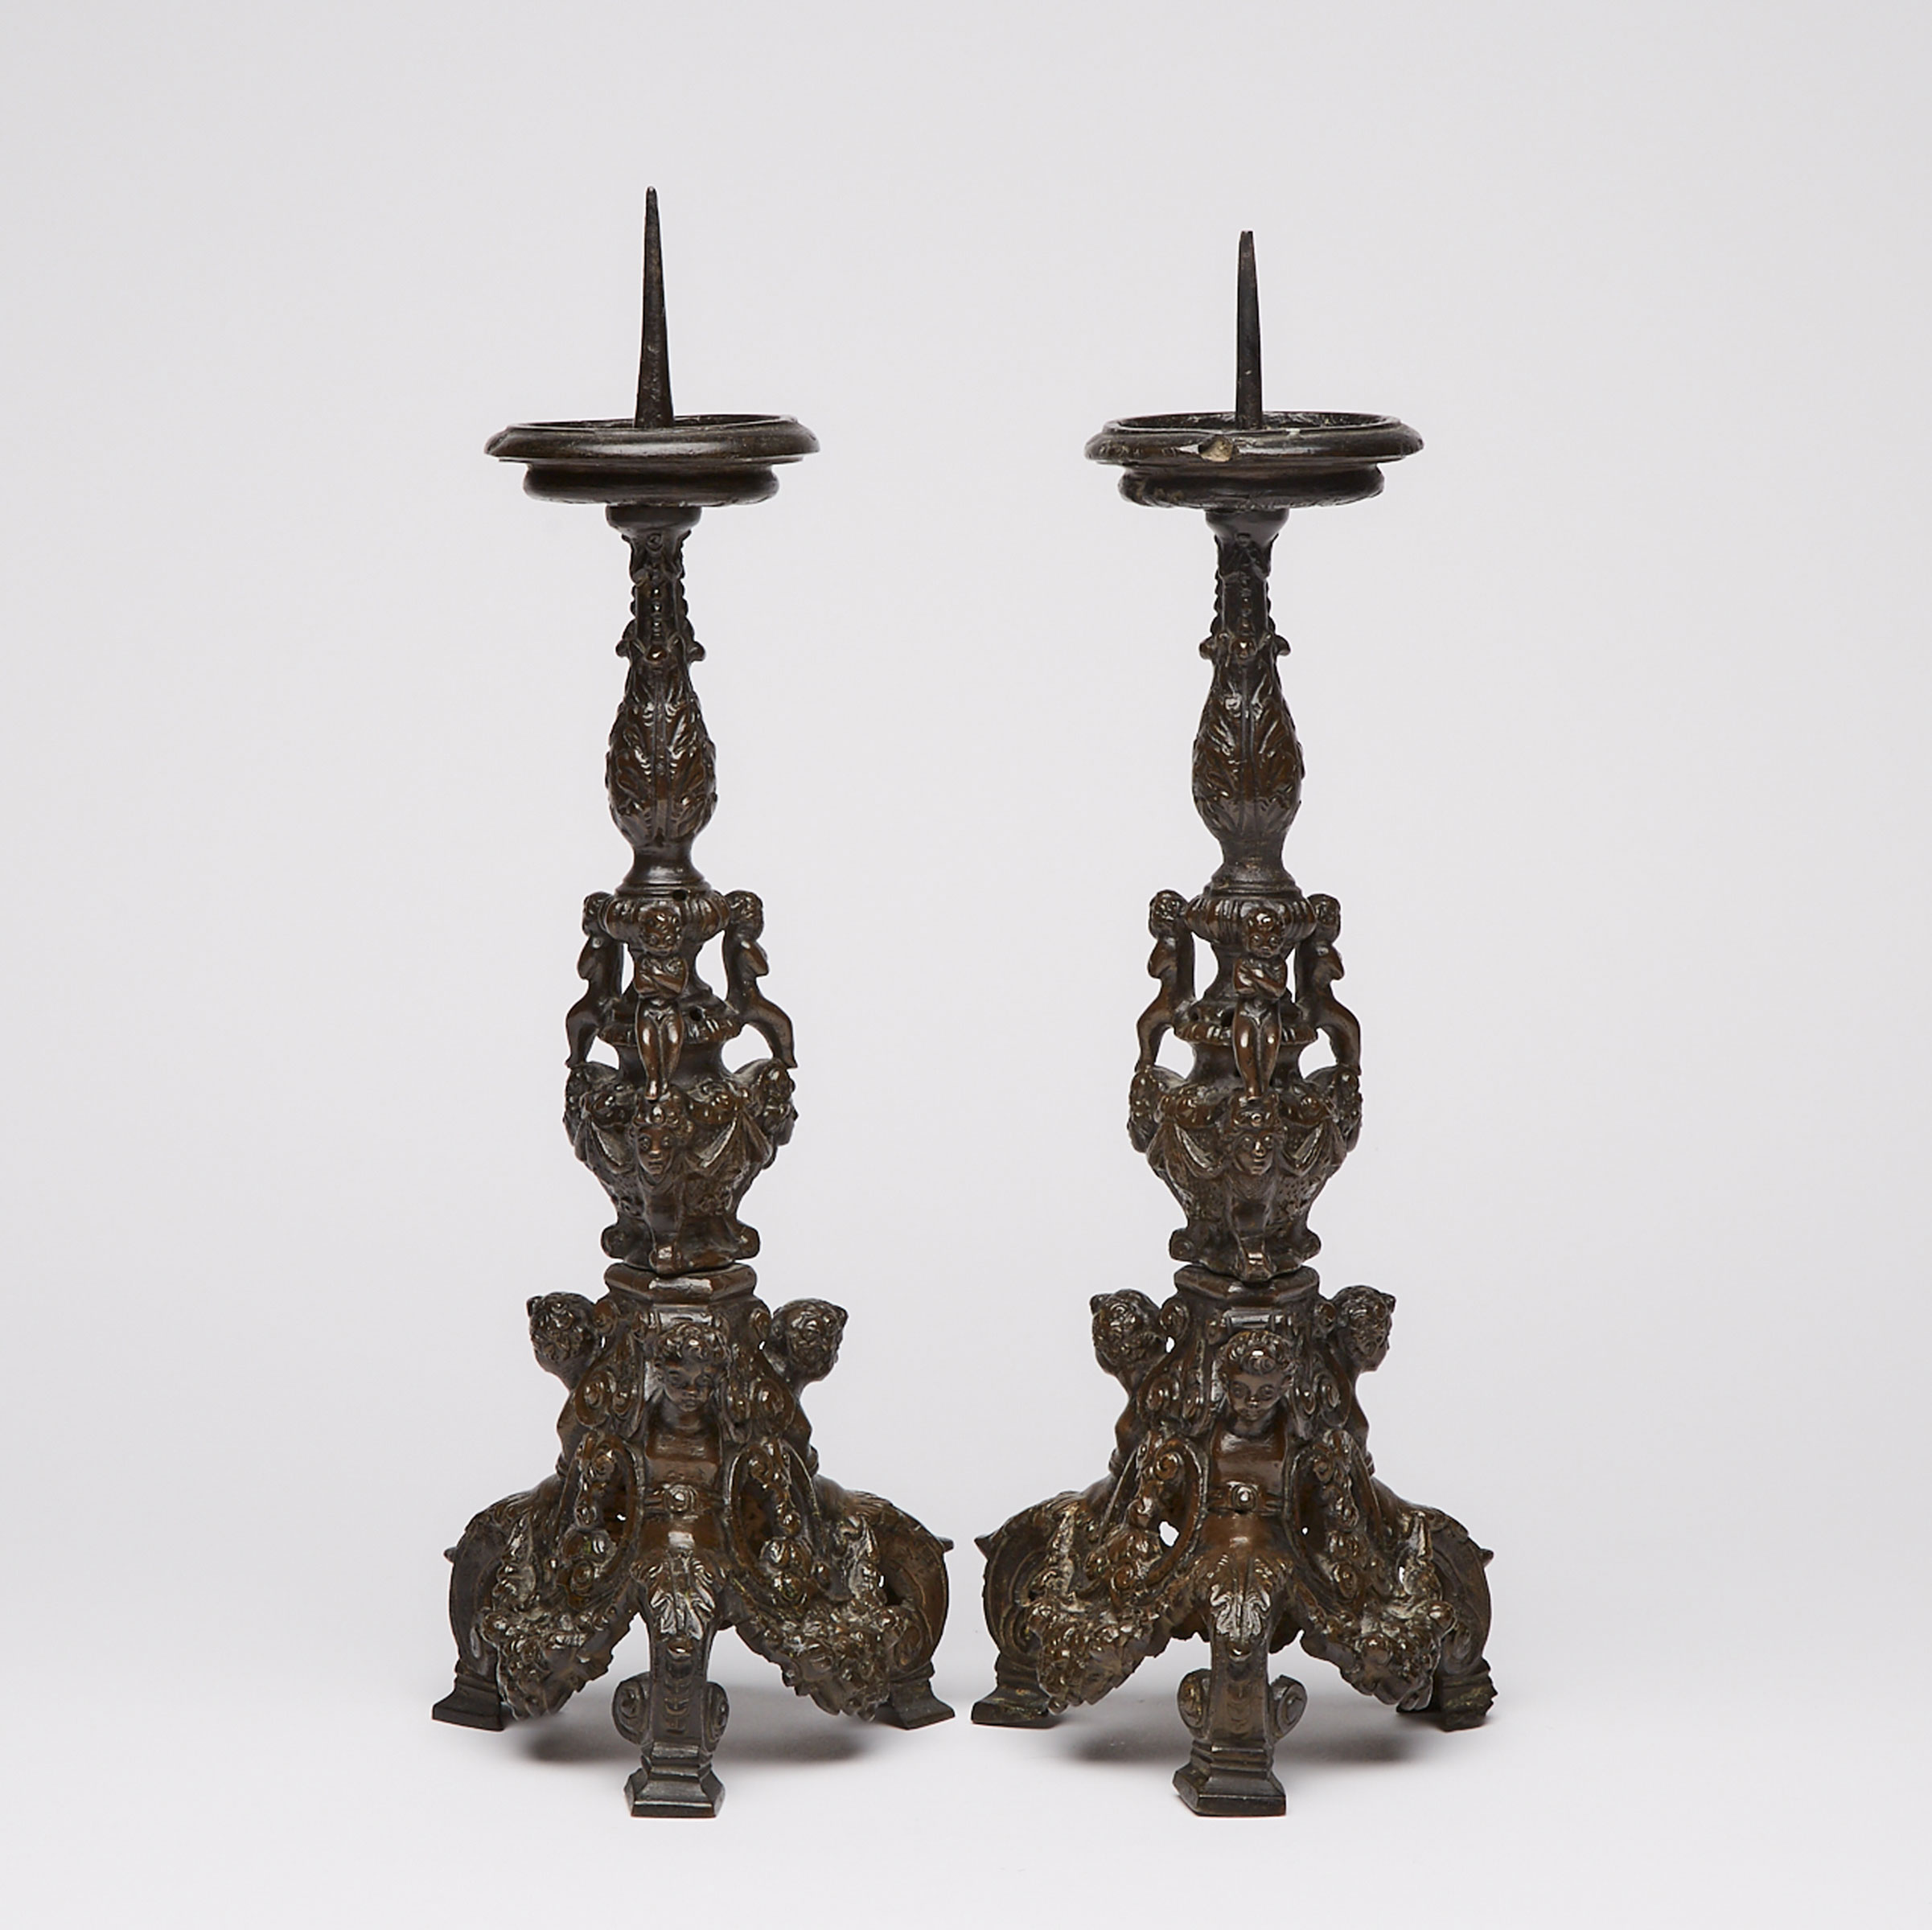 Pair of North Italian Renaissance Bronze Pricket Candlesticks with Pesaro Family Coat of Arms, Attributed to the Workshop of  Niccolò Roccatagliata, Venice, 16th century